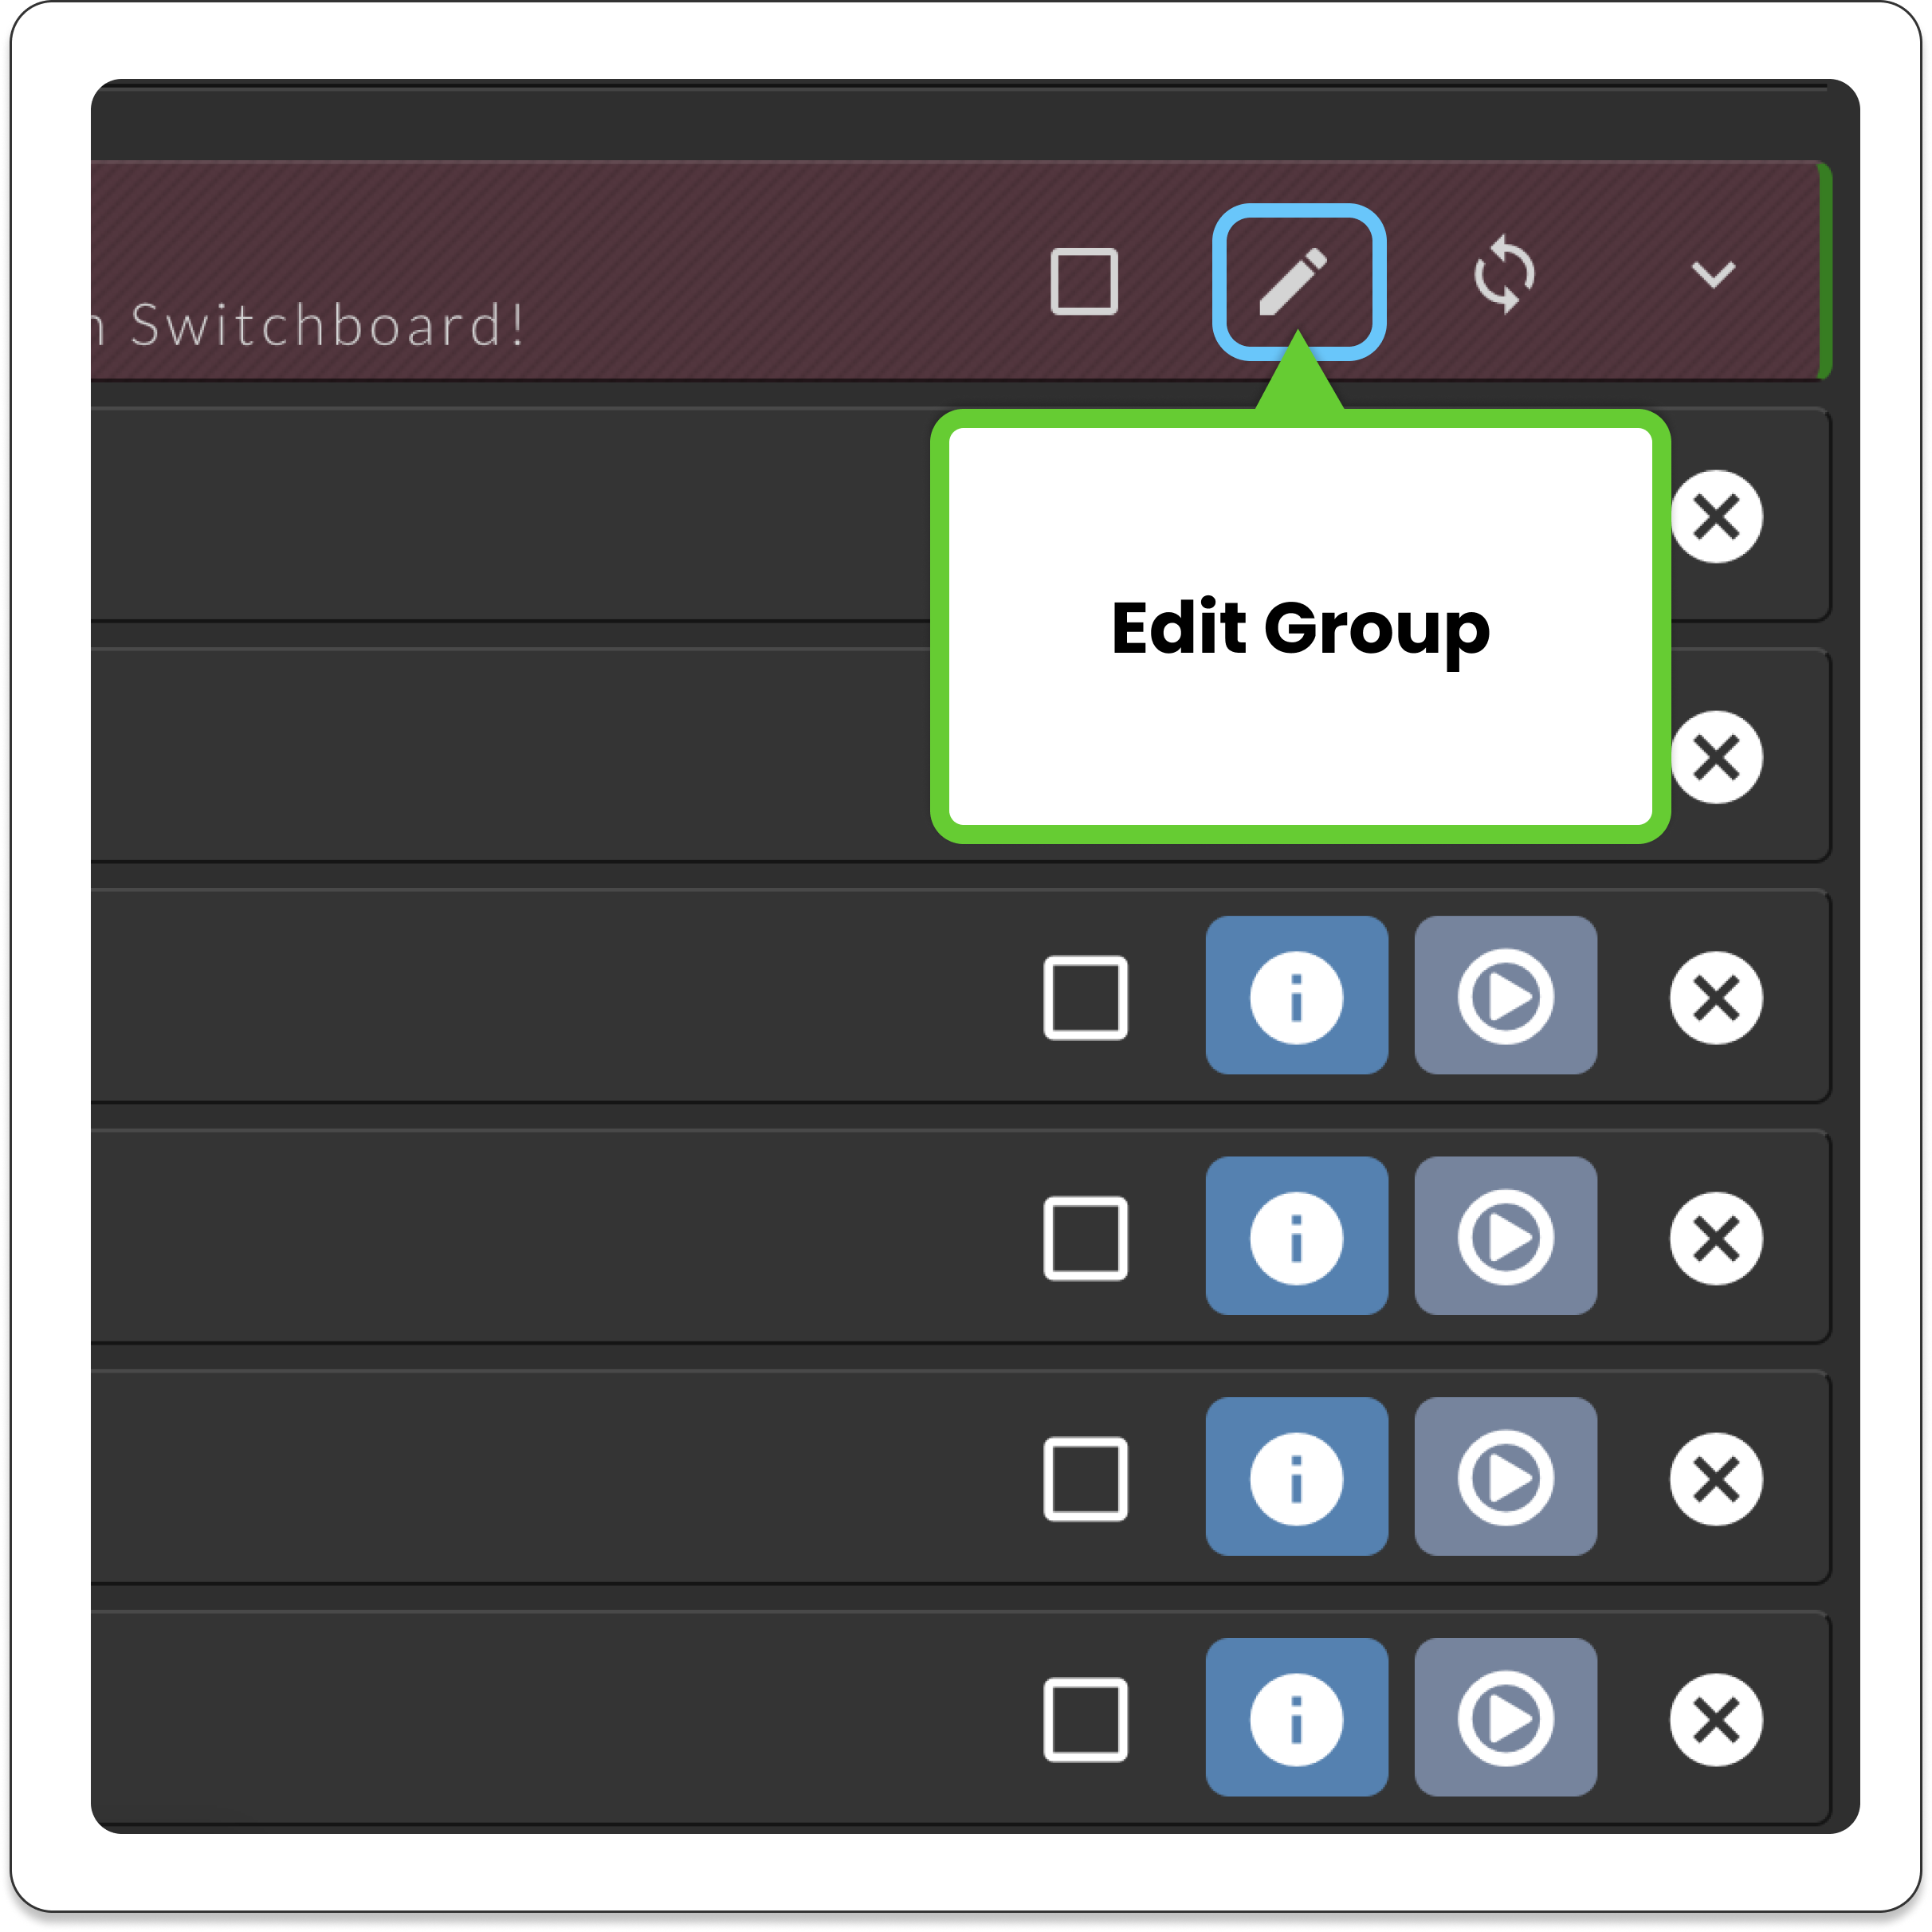 switchboardlive_workflow-page_destinations_pane_editgroup-button-pencil-icon.png